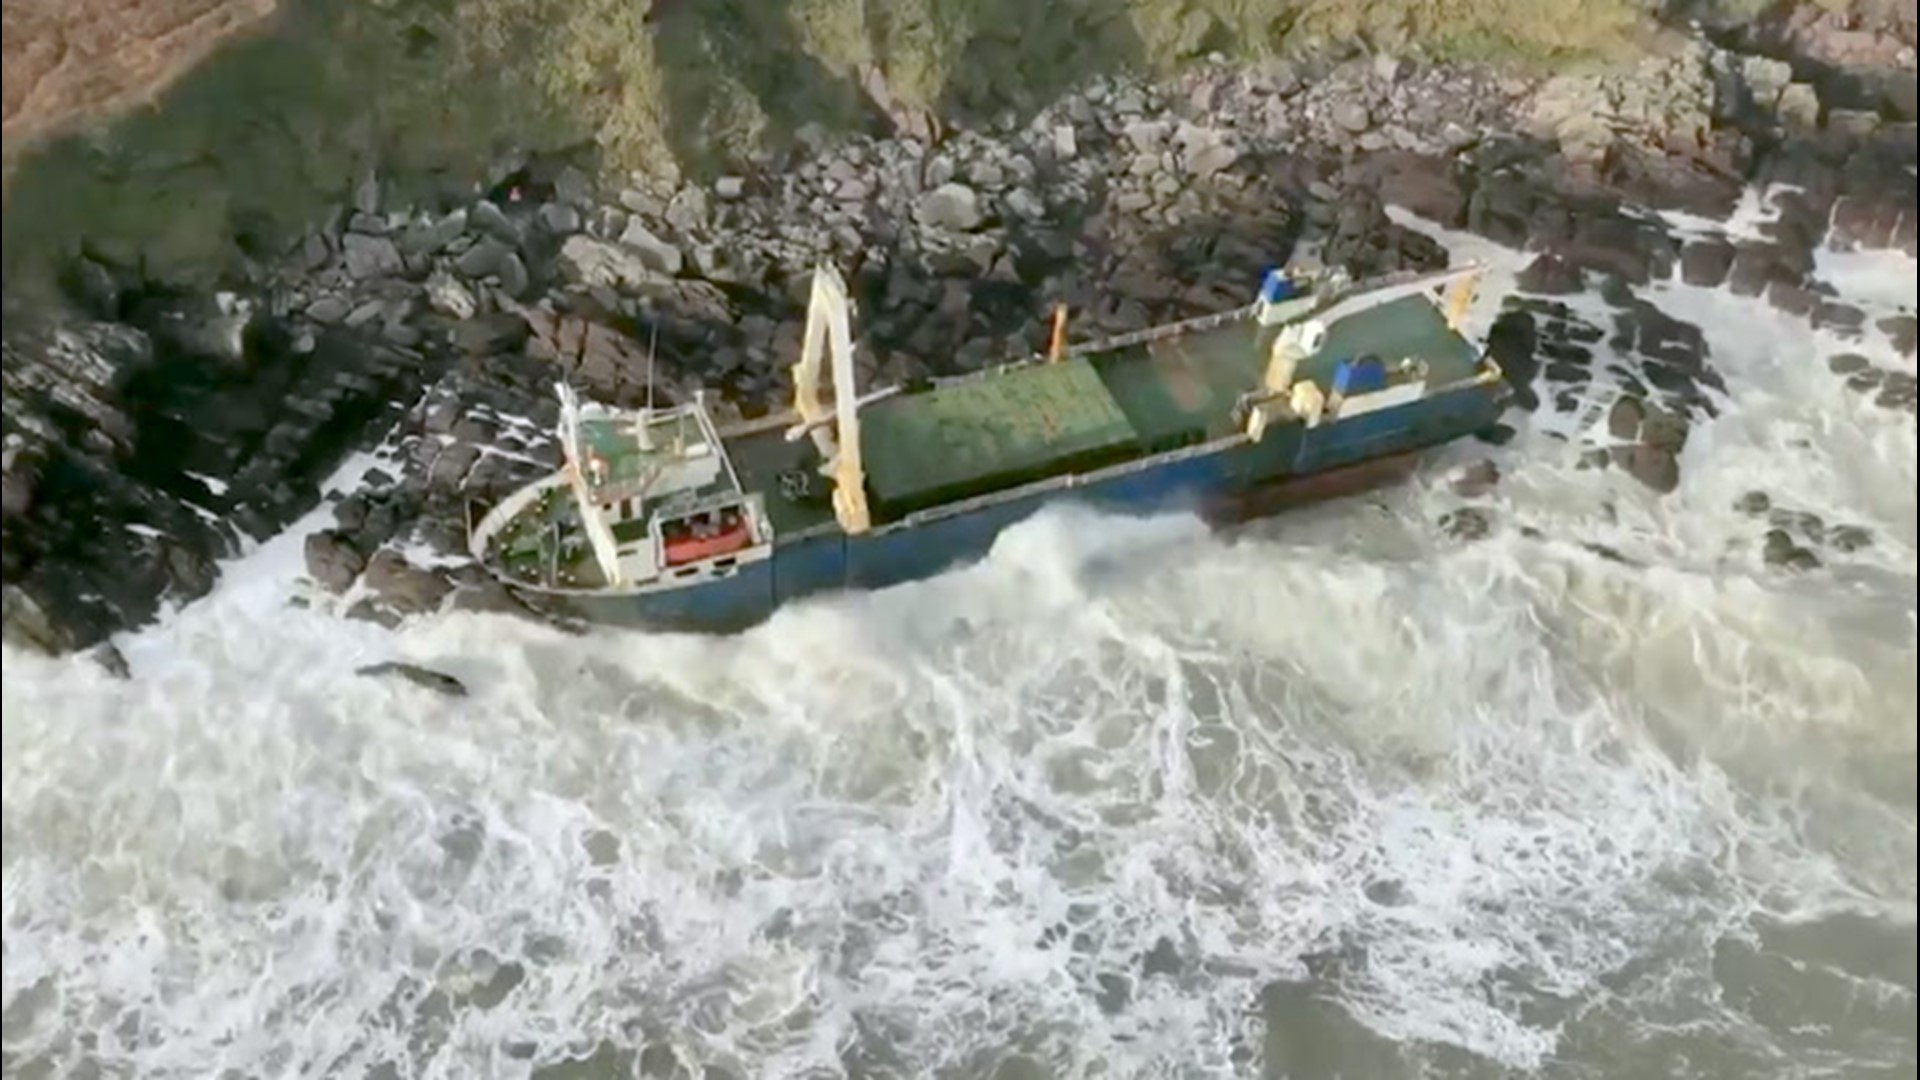 A vessel which had been drifting out a sea since September 2018, ran aground near Ballycotton, Ireland, on Feb. 16 because of Storm Dennis.